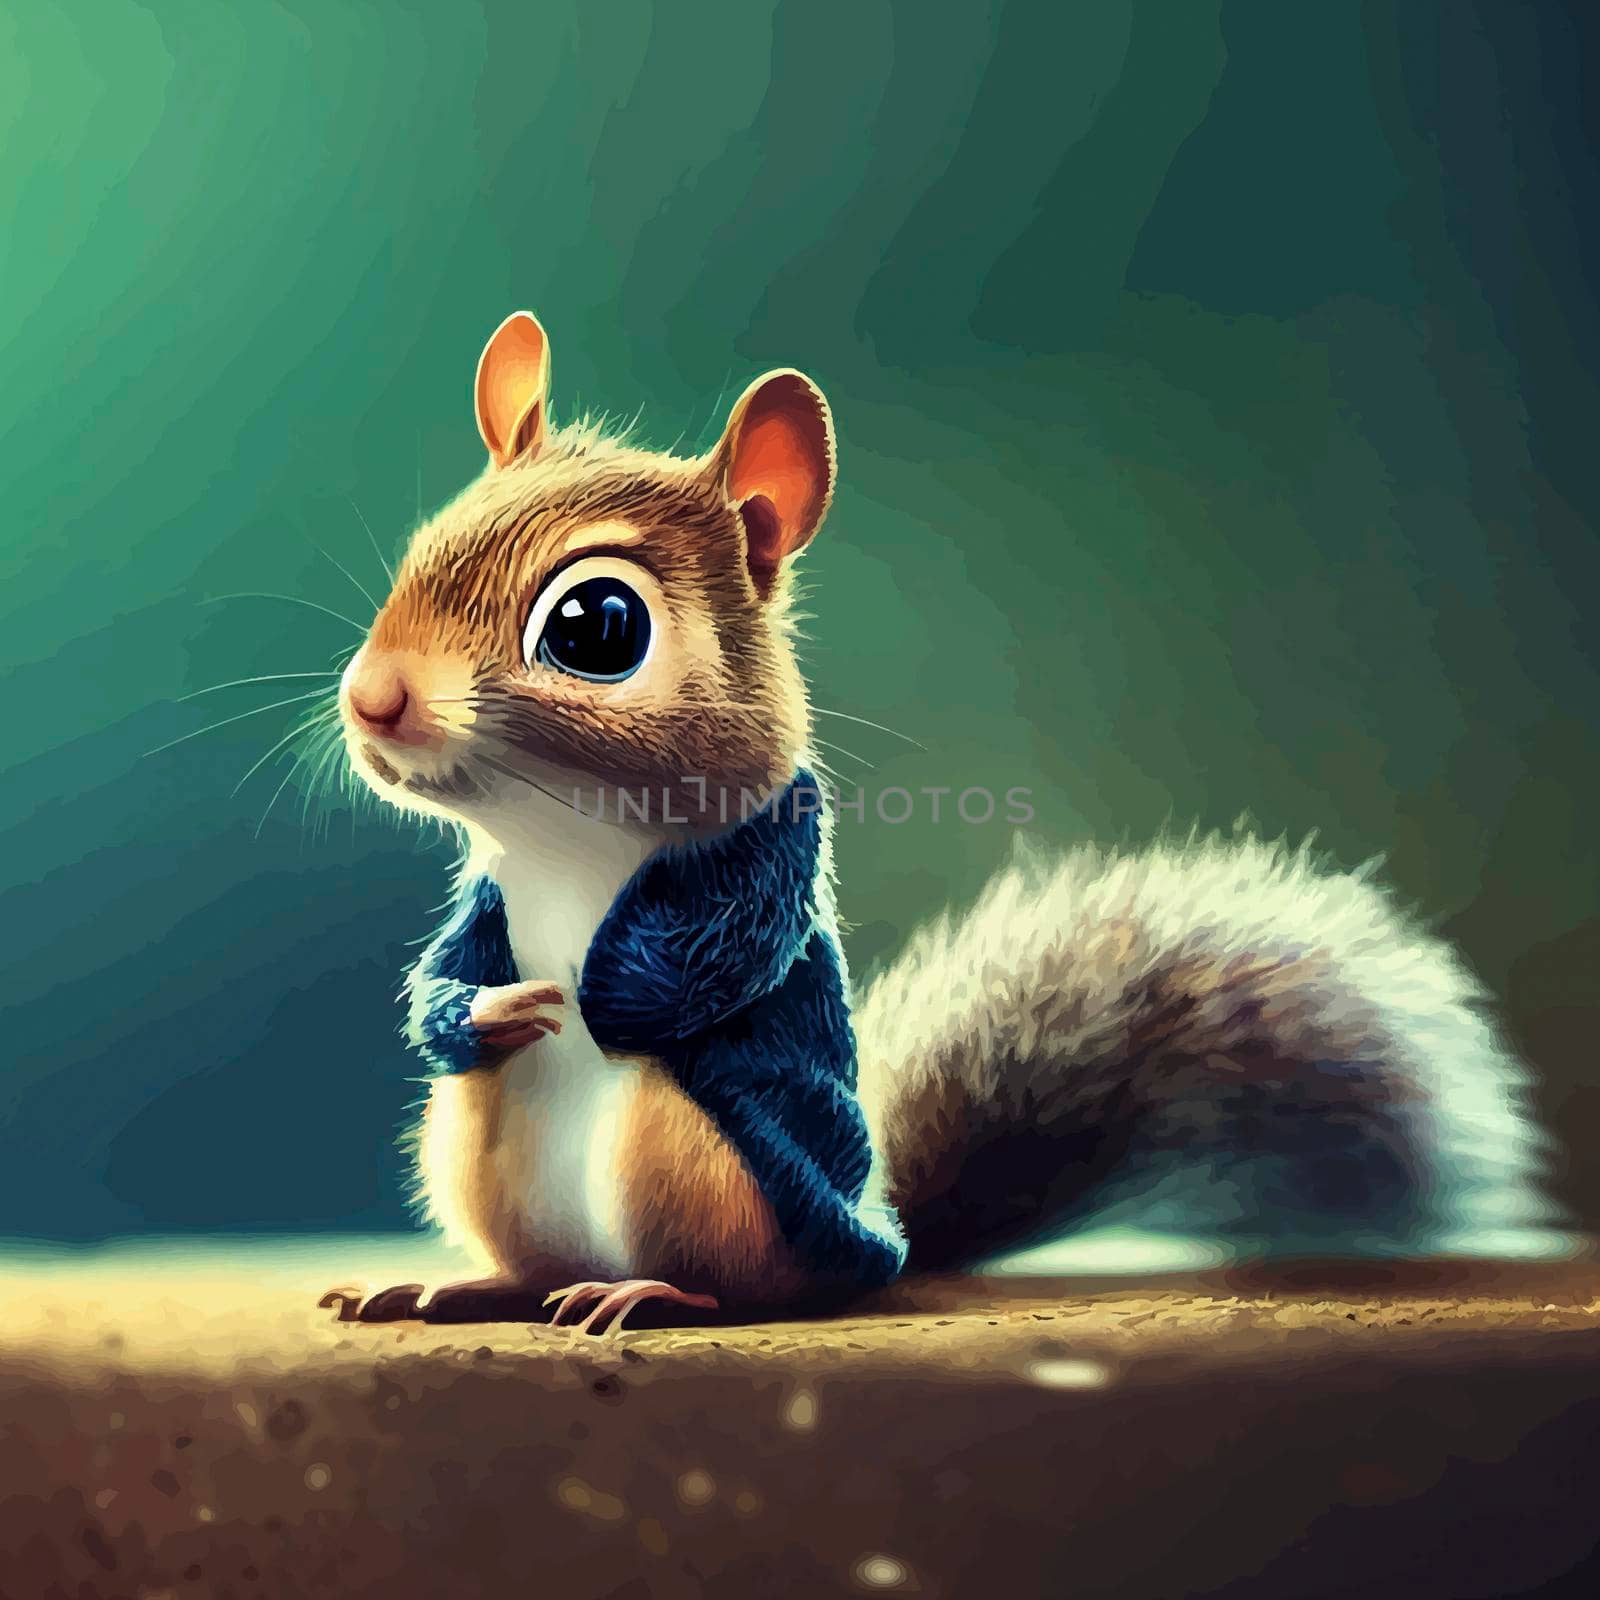 animated illustration of a cute squirrel, animated squirrel portrait. animated squirrel with sweater by JpRamos